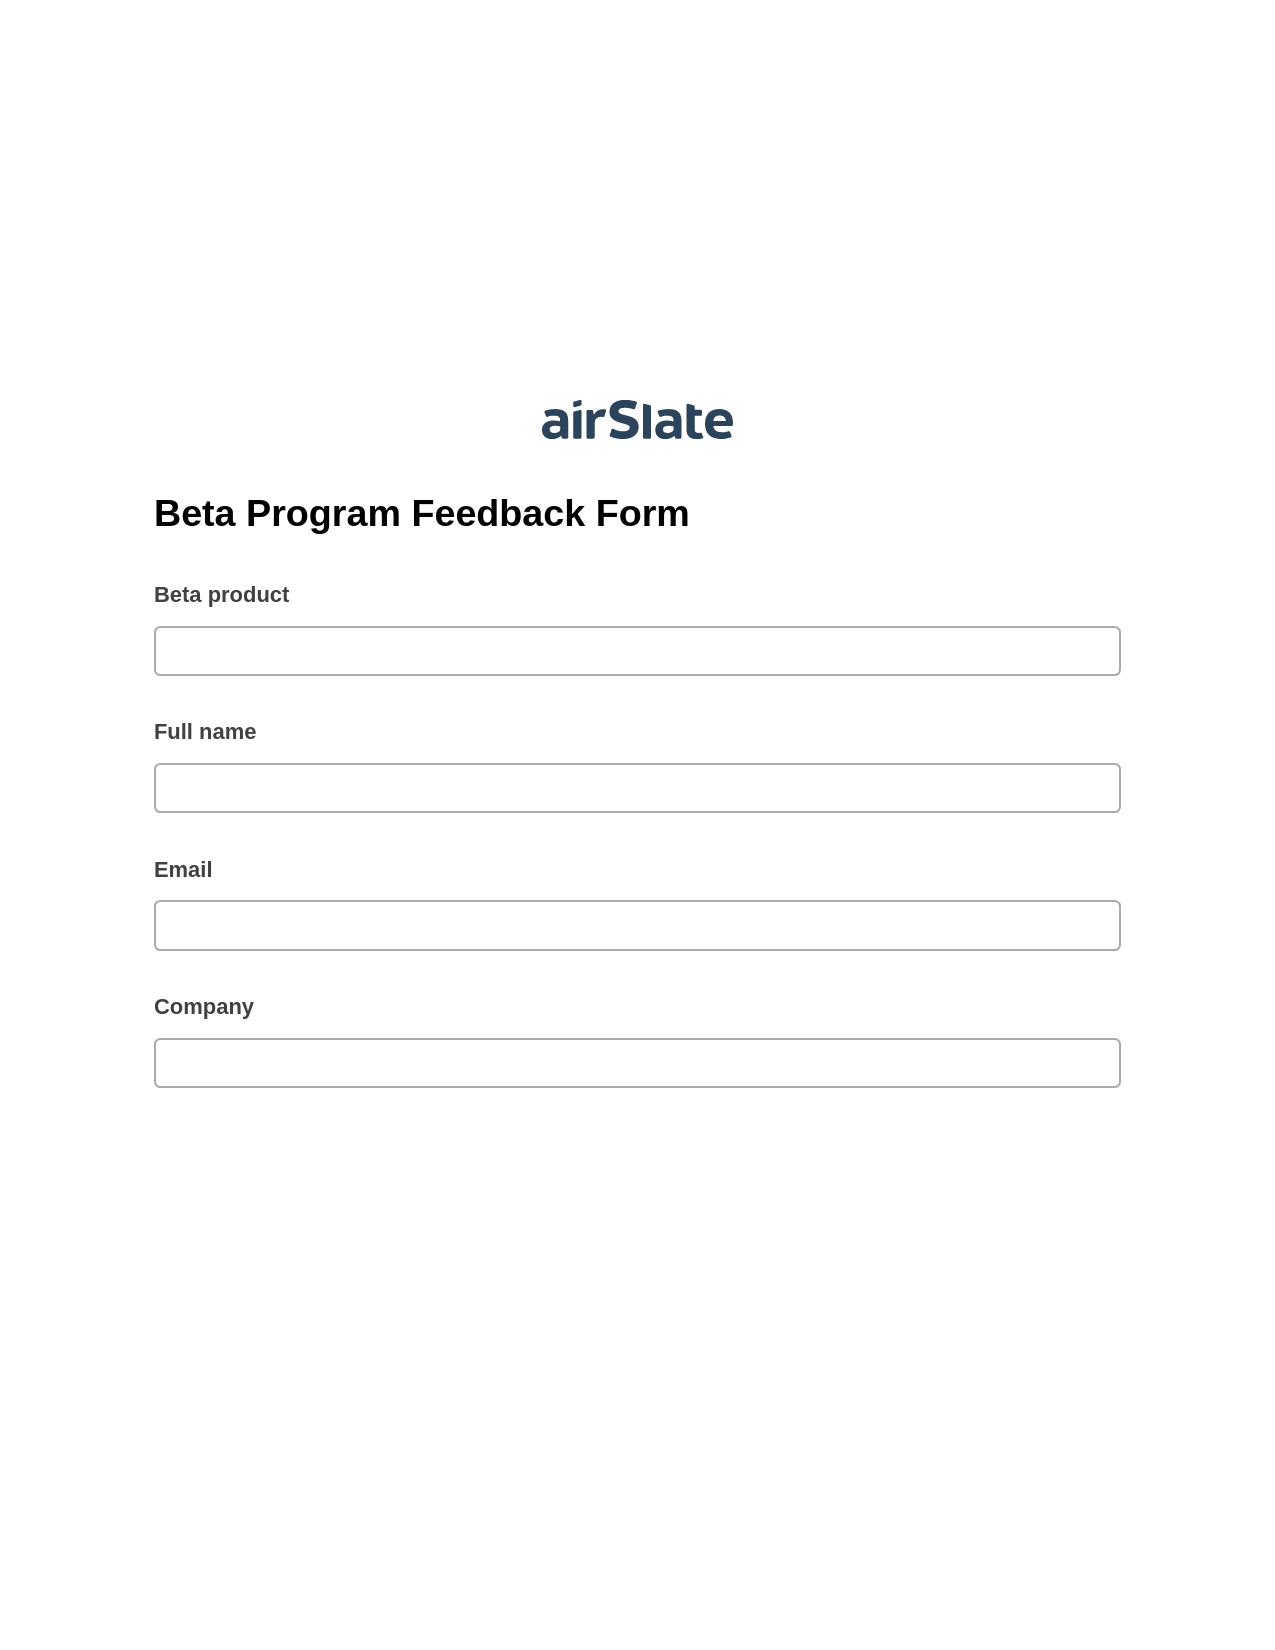 Beta Program Feedback Form Pre-fill Document Bot, Create Salesforce Record Bot, Export to Excel 365 Bot